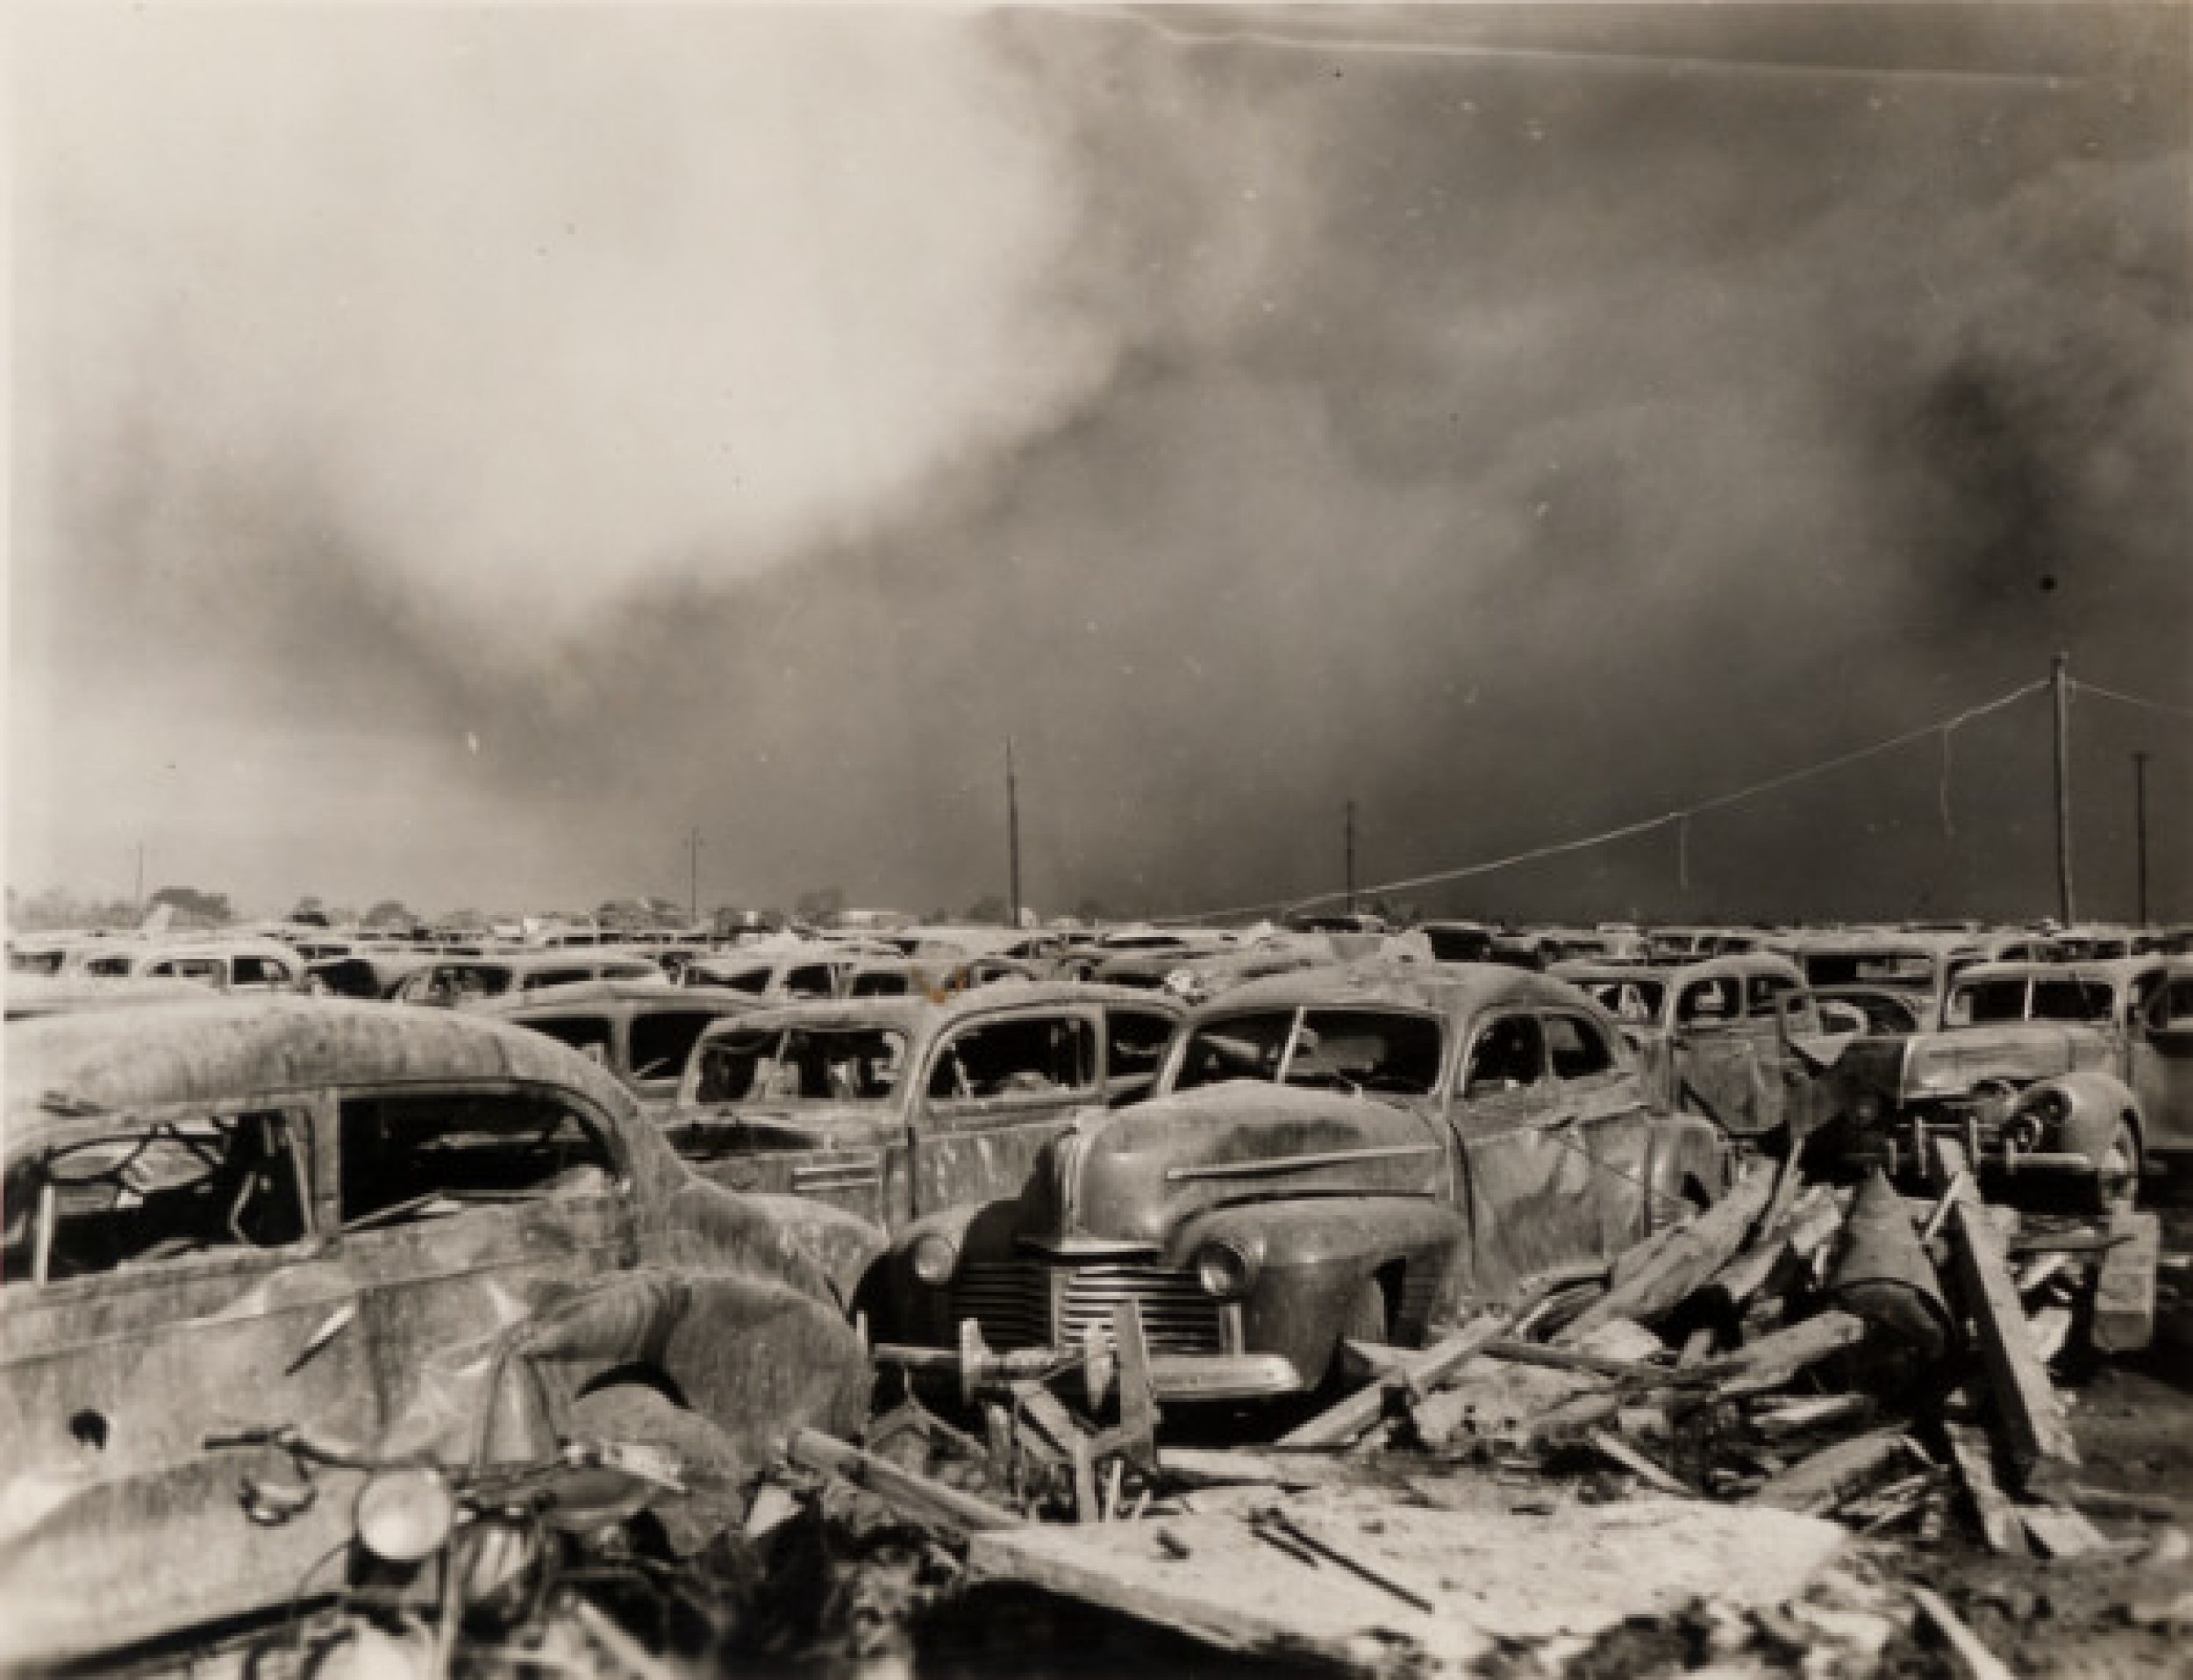 West Texas Fertilizer Plant Explosion 66 Years Ago A Far Worse Industrial Accident Hammered 8736